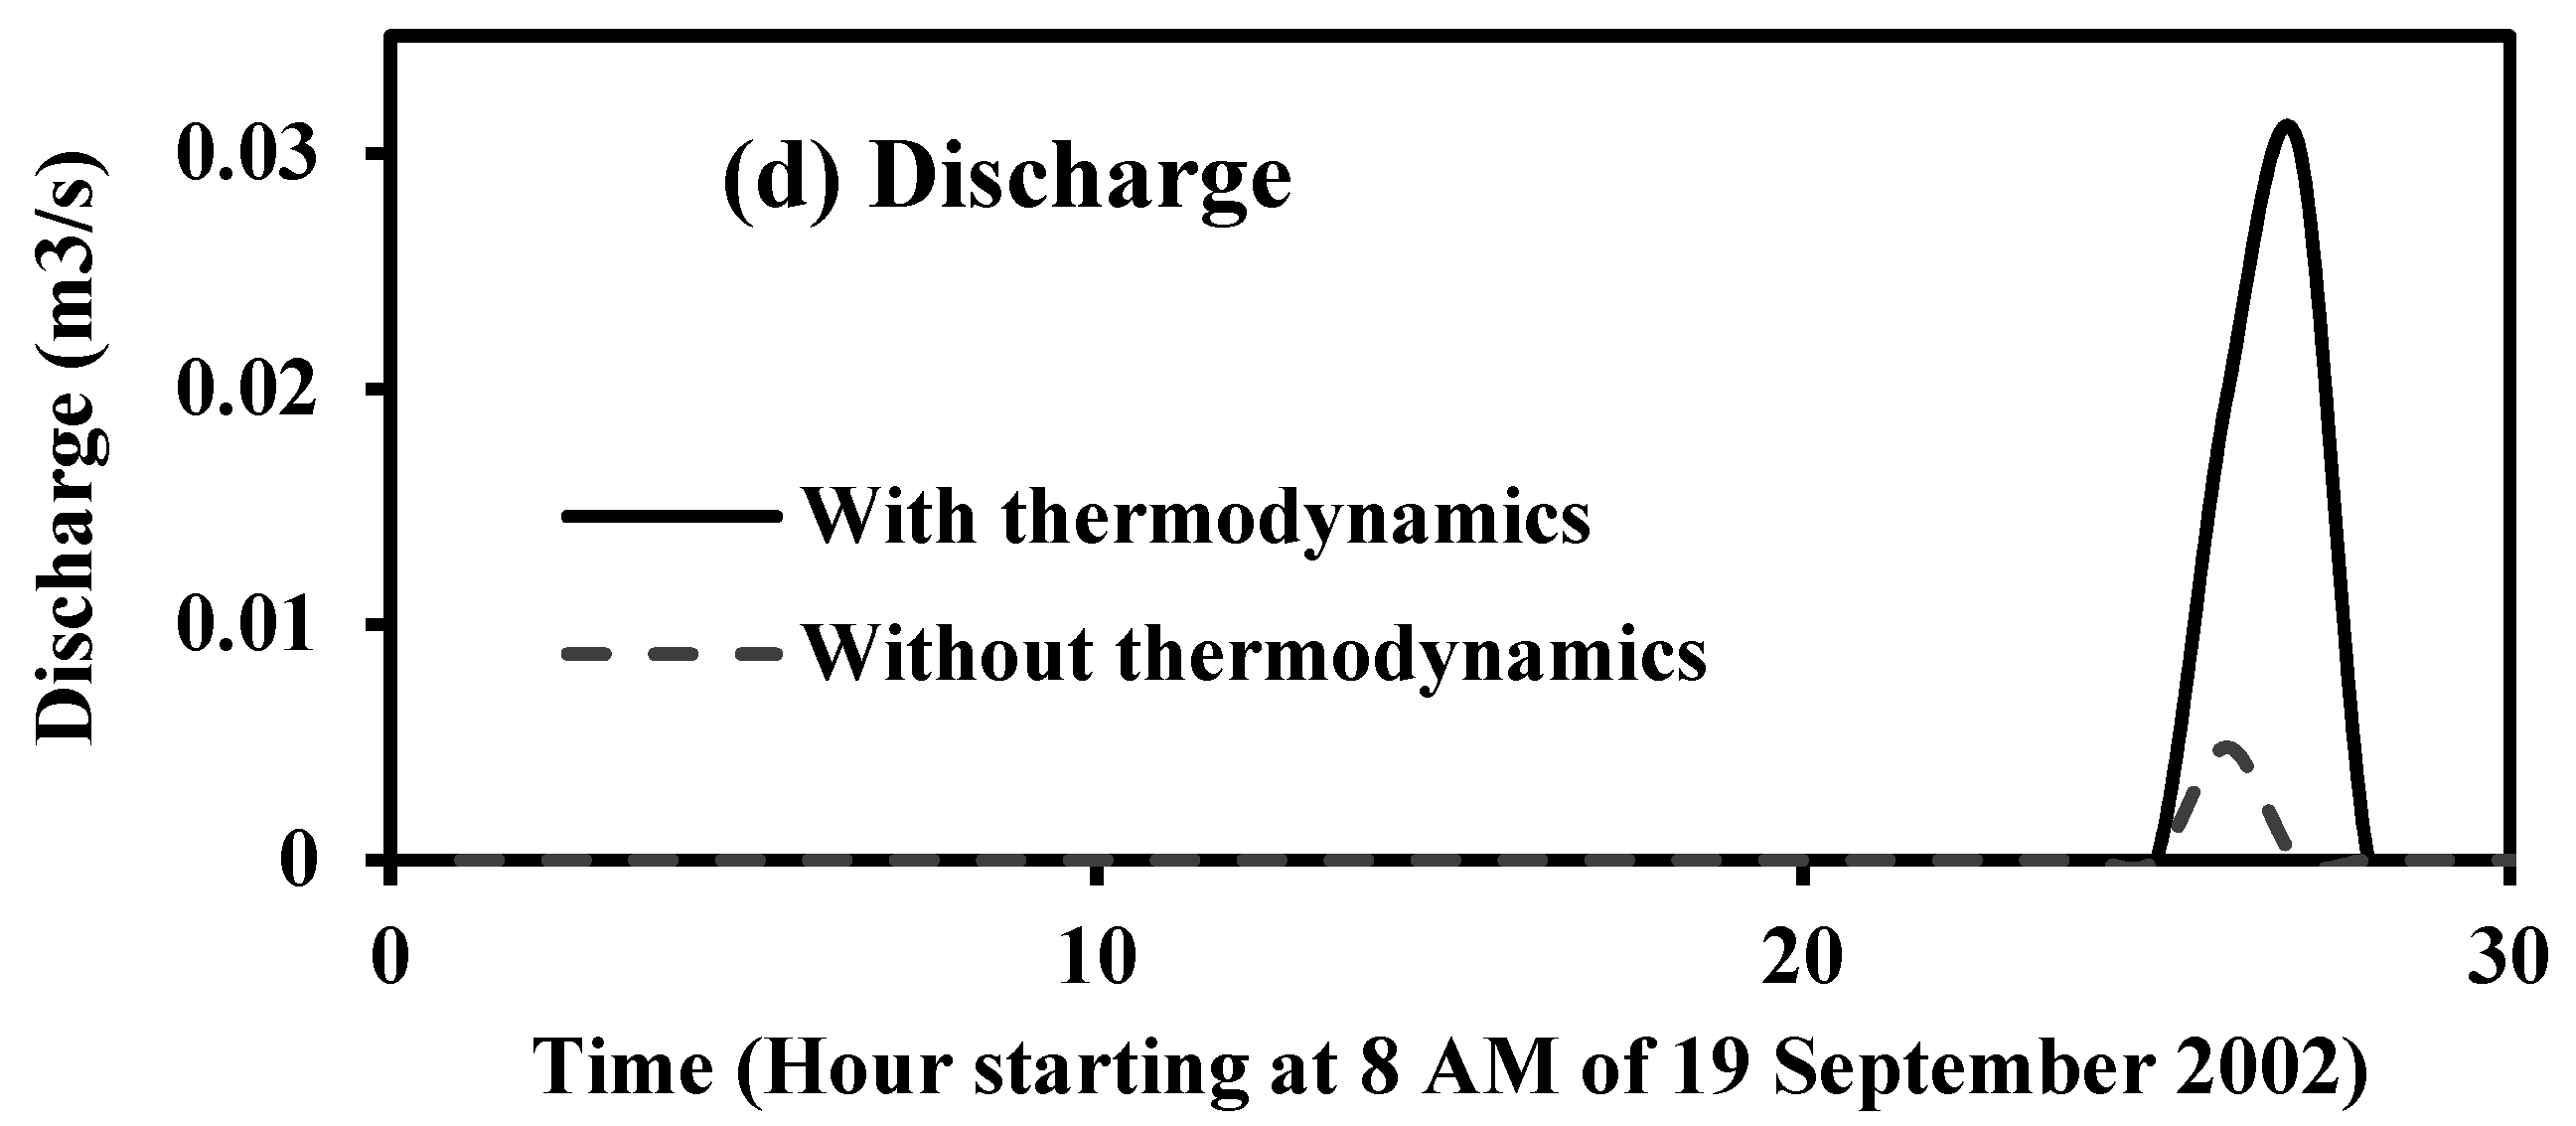 interactive thermodynamics it 3.2 not working